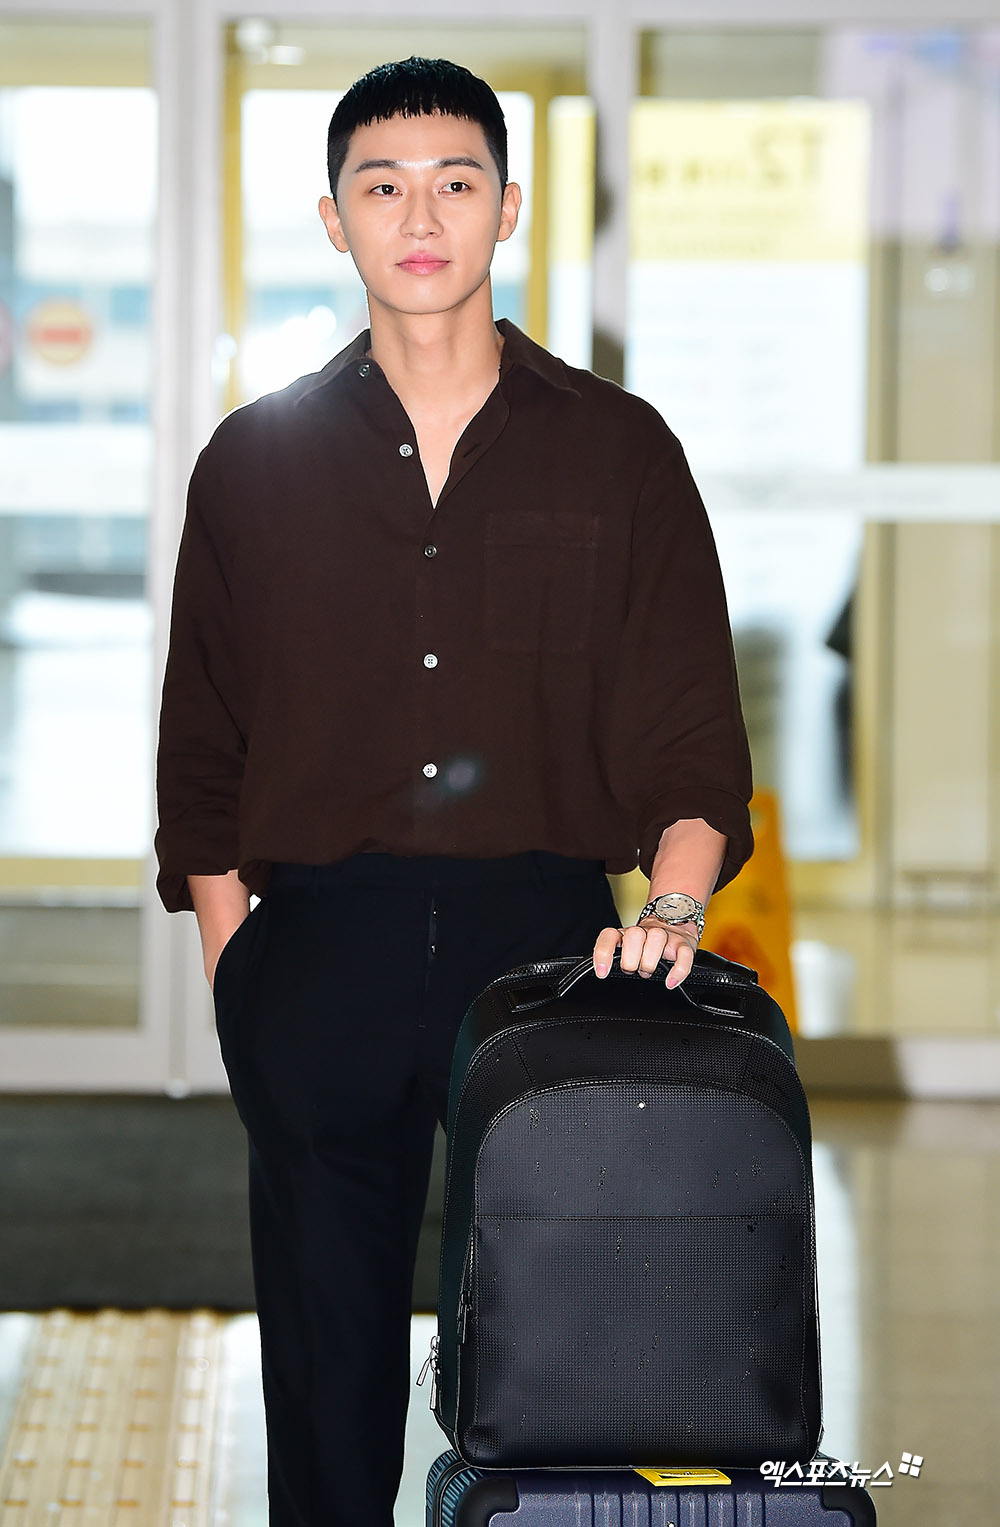 Actor Park Seo-joon is departing to Taiwan through Incheon International Airport on the 29th of the overseas schedule.